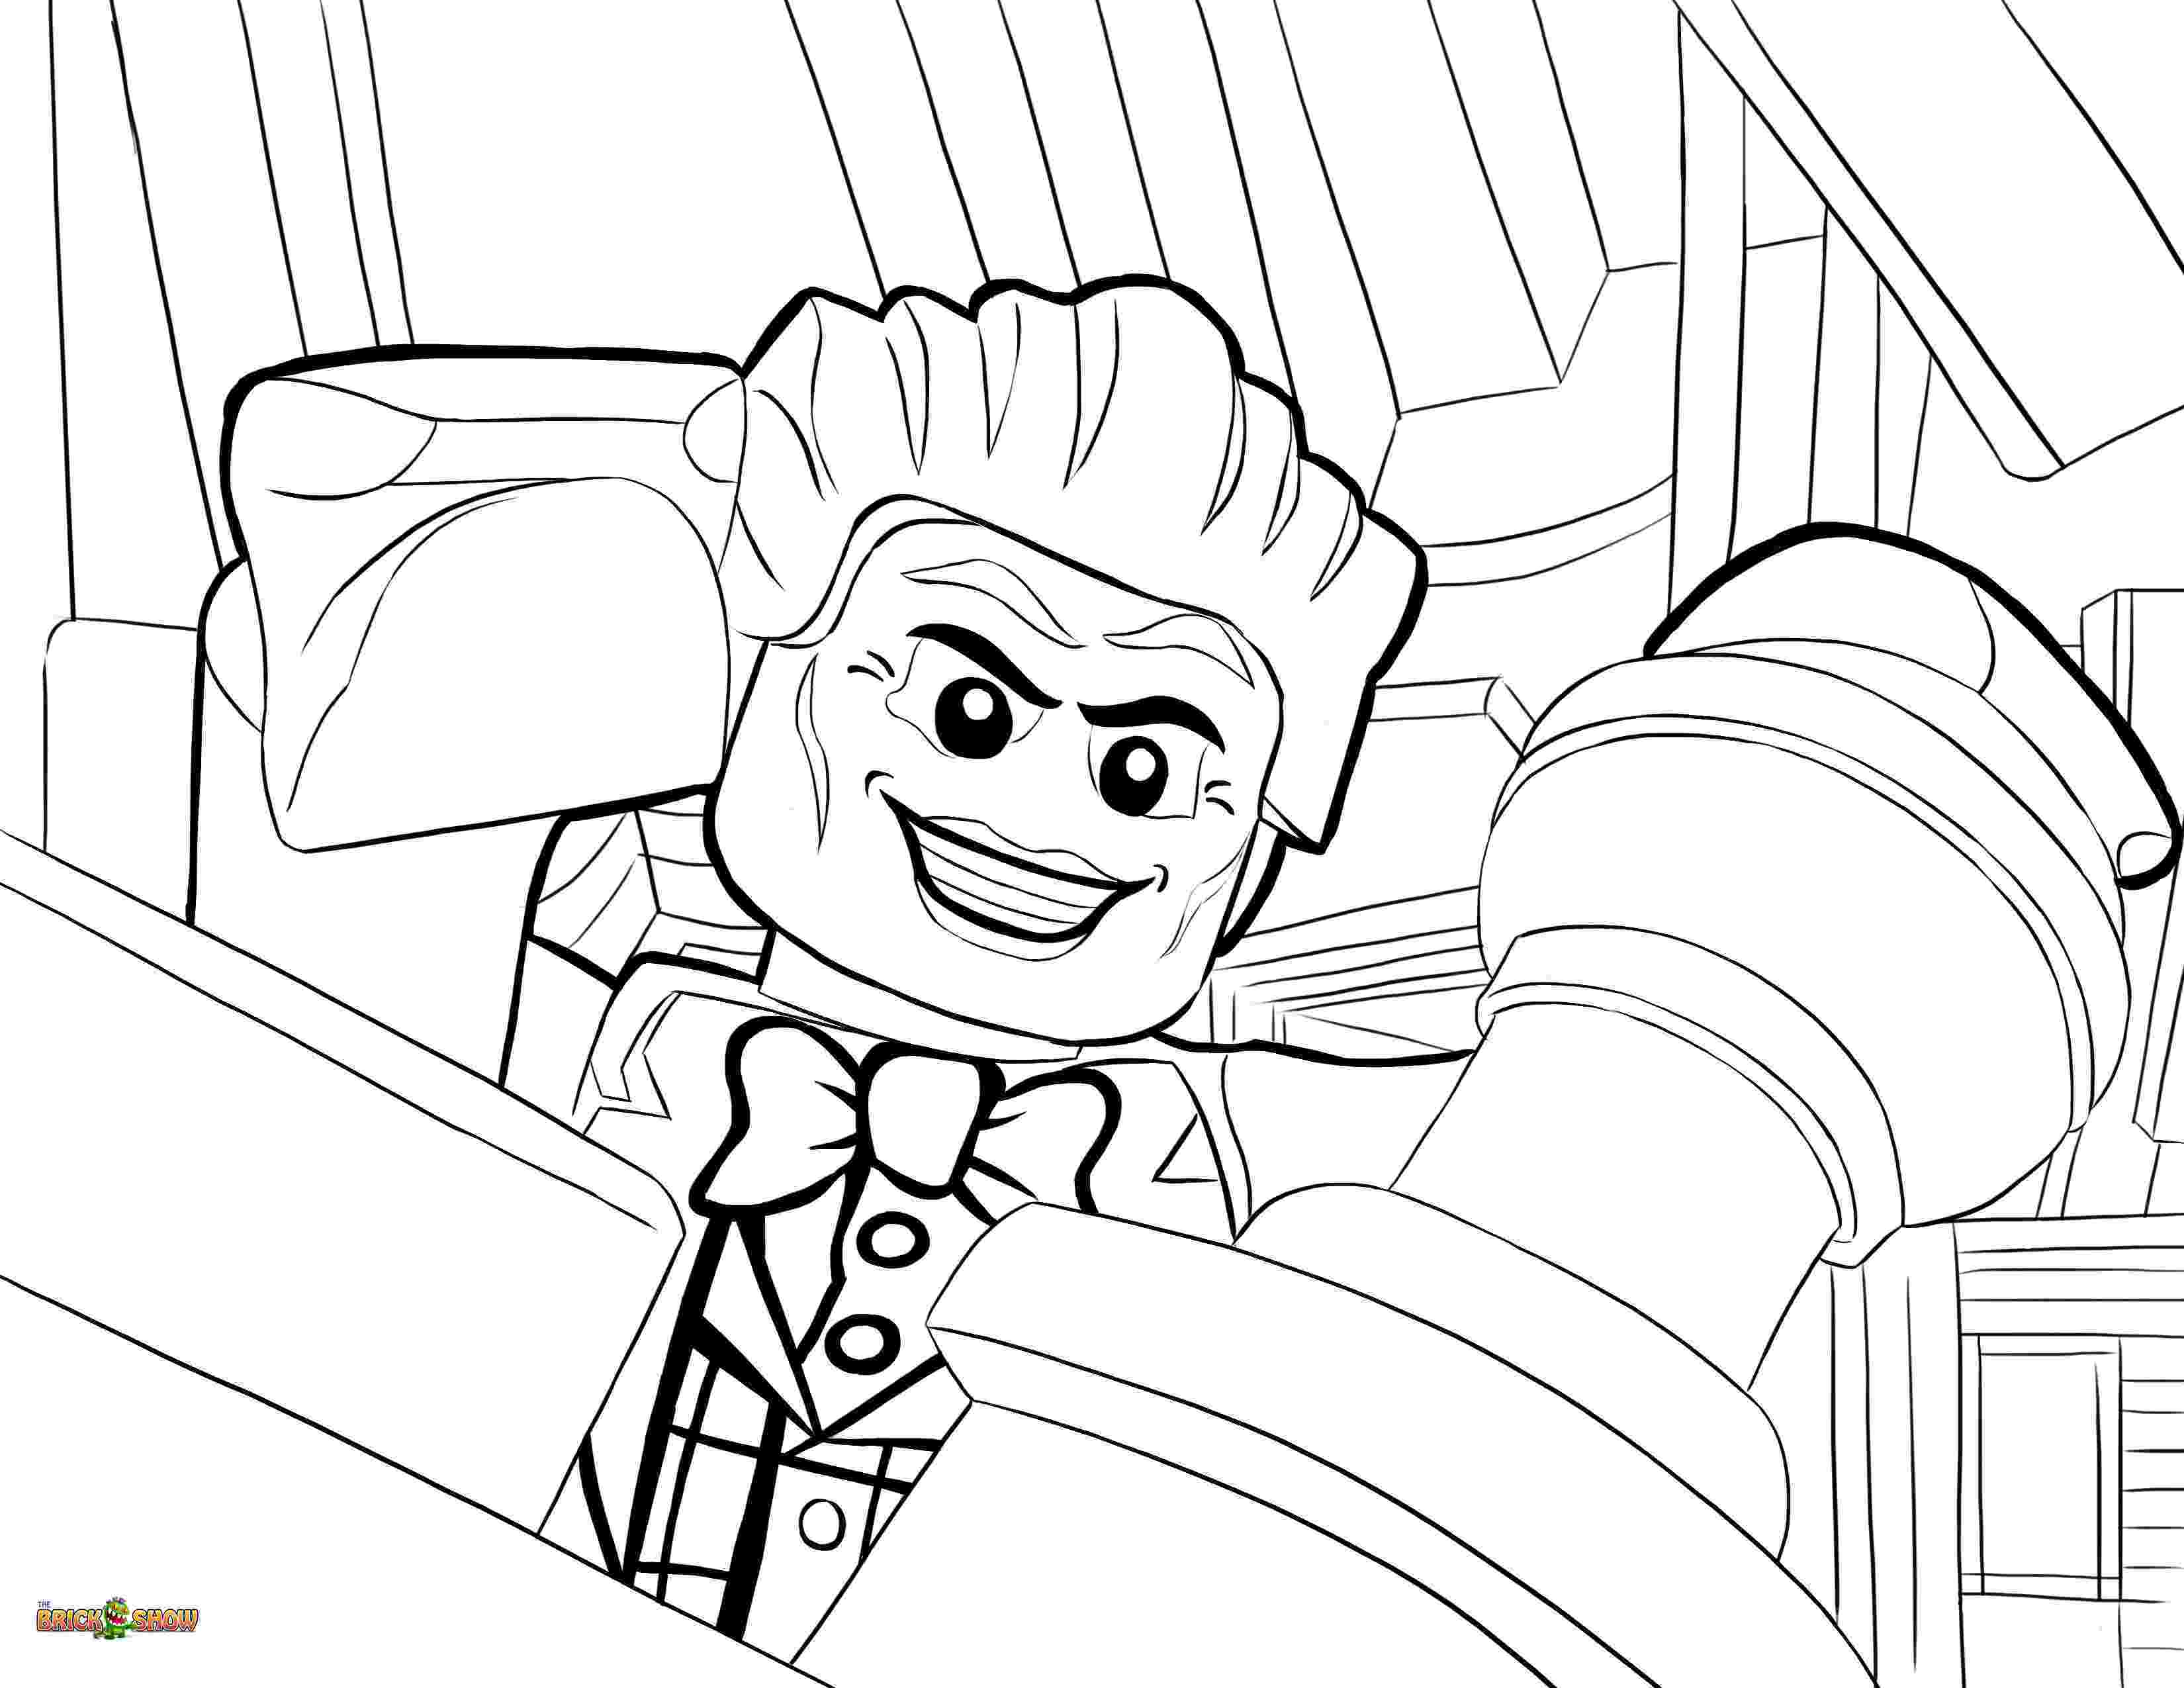 lego super heroes coloring pages lego batman coloring pages to download and print for free heroes pages lego super coloring 